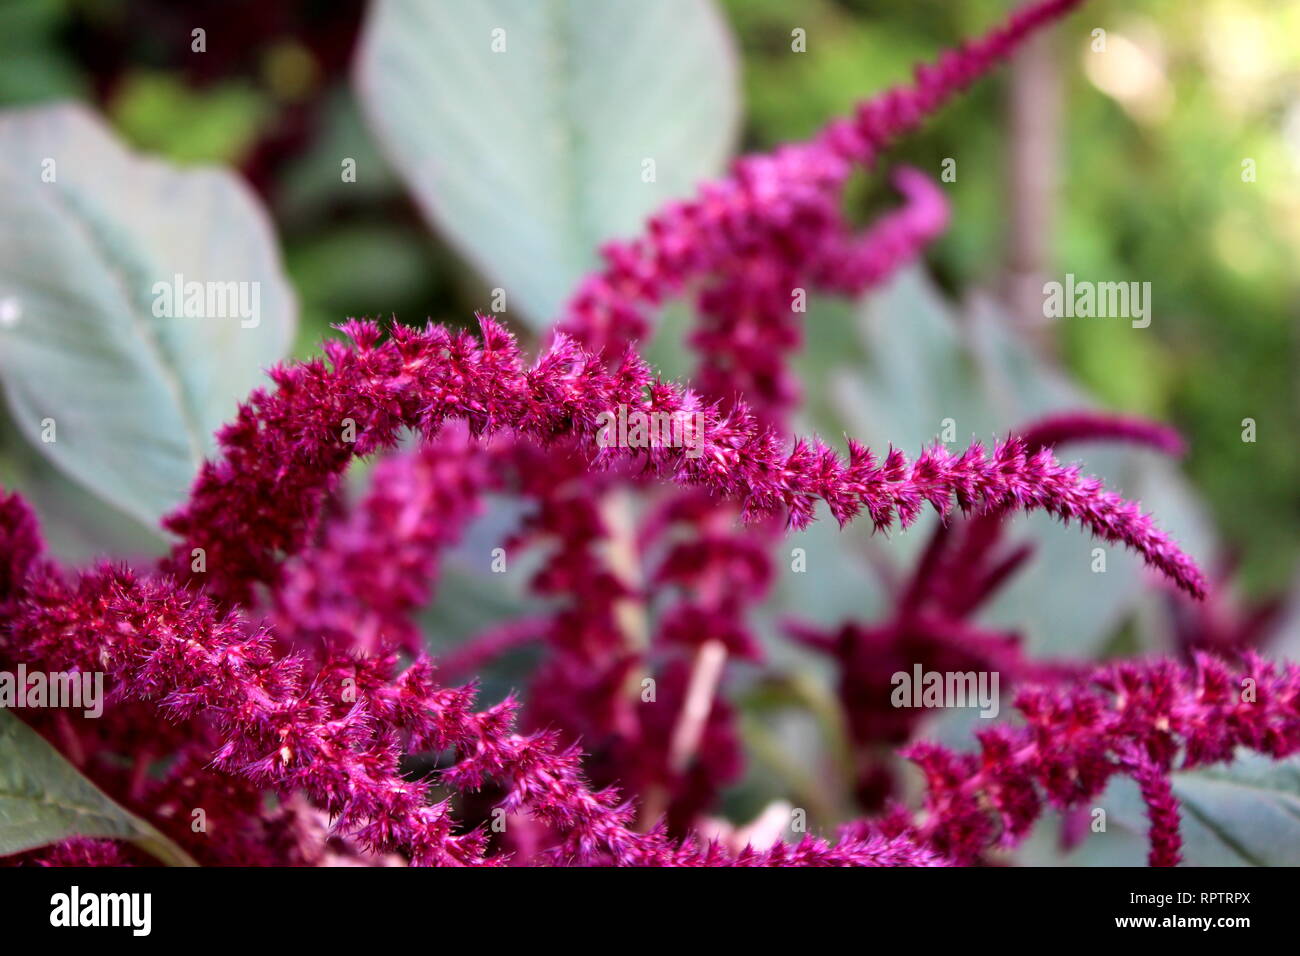 Dark pink Amaranth or Amaranthus cosmopolitan annual plant flowers arranged in colourful bracts looking like unusual flower snakes Stock Photo